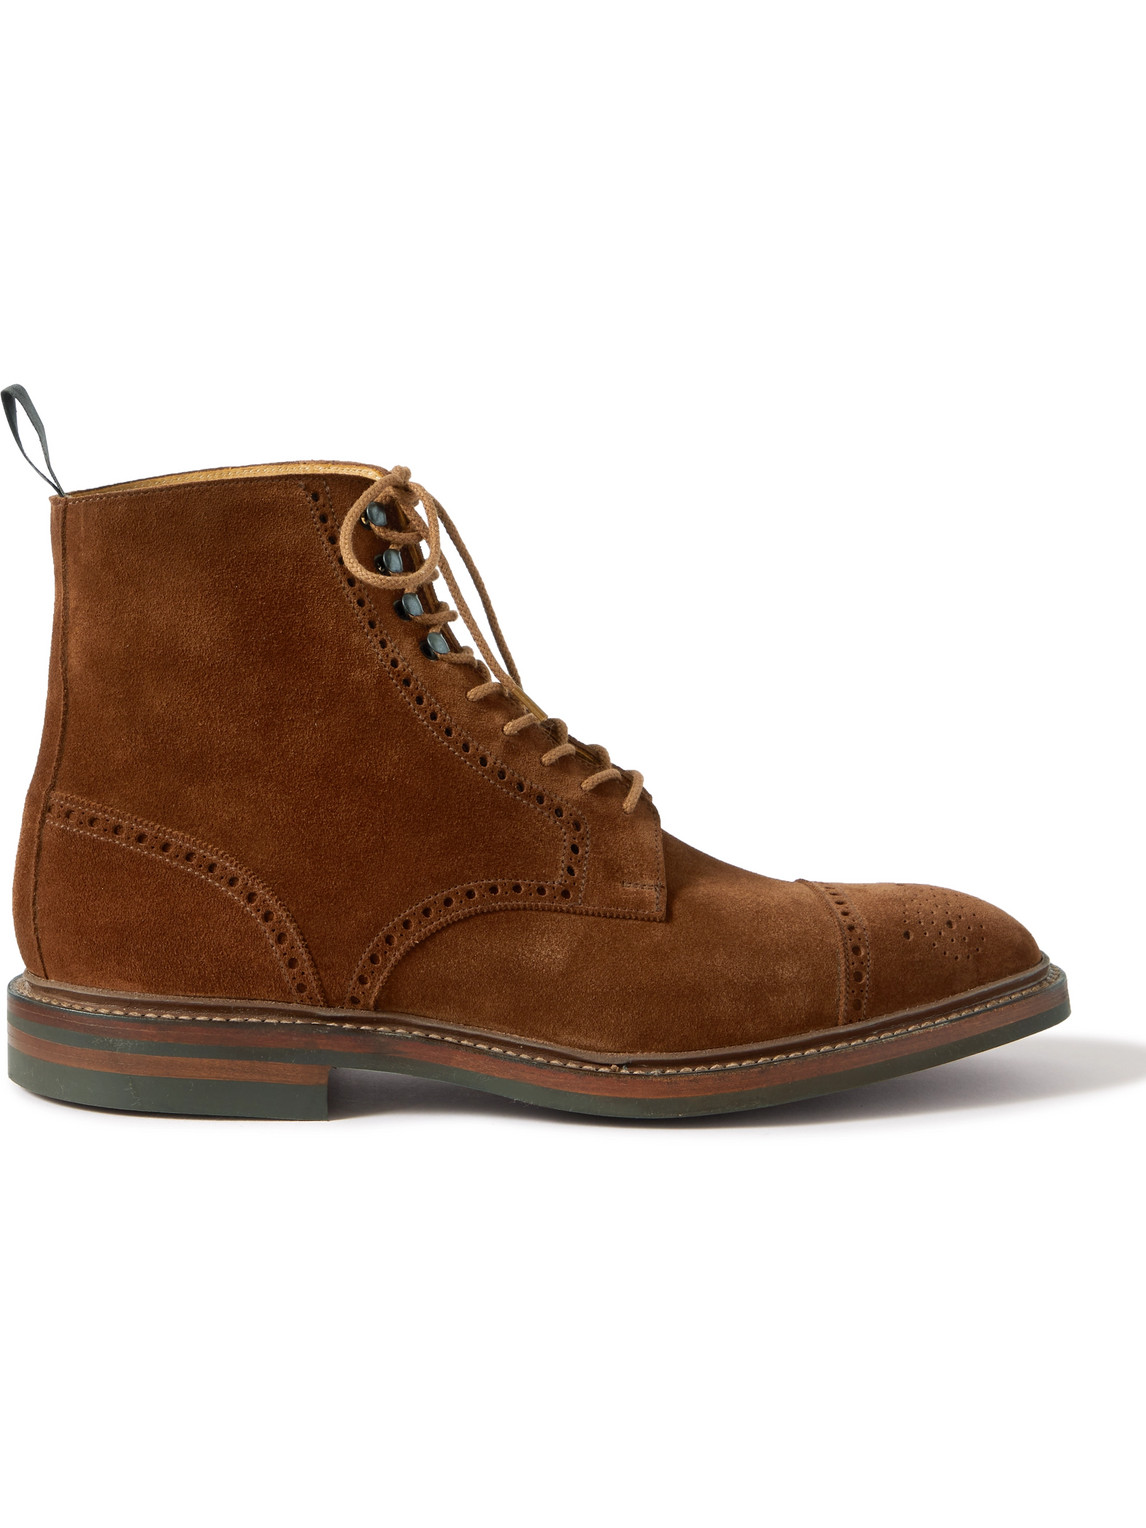 George Cleverley Toby Suede Brogue Boots In Brown